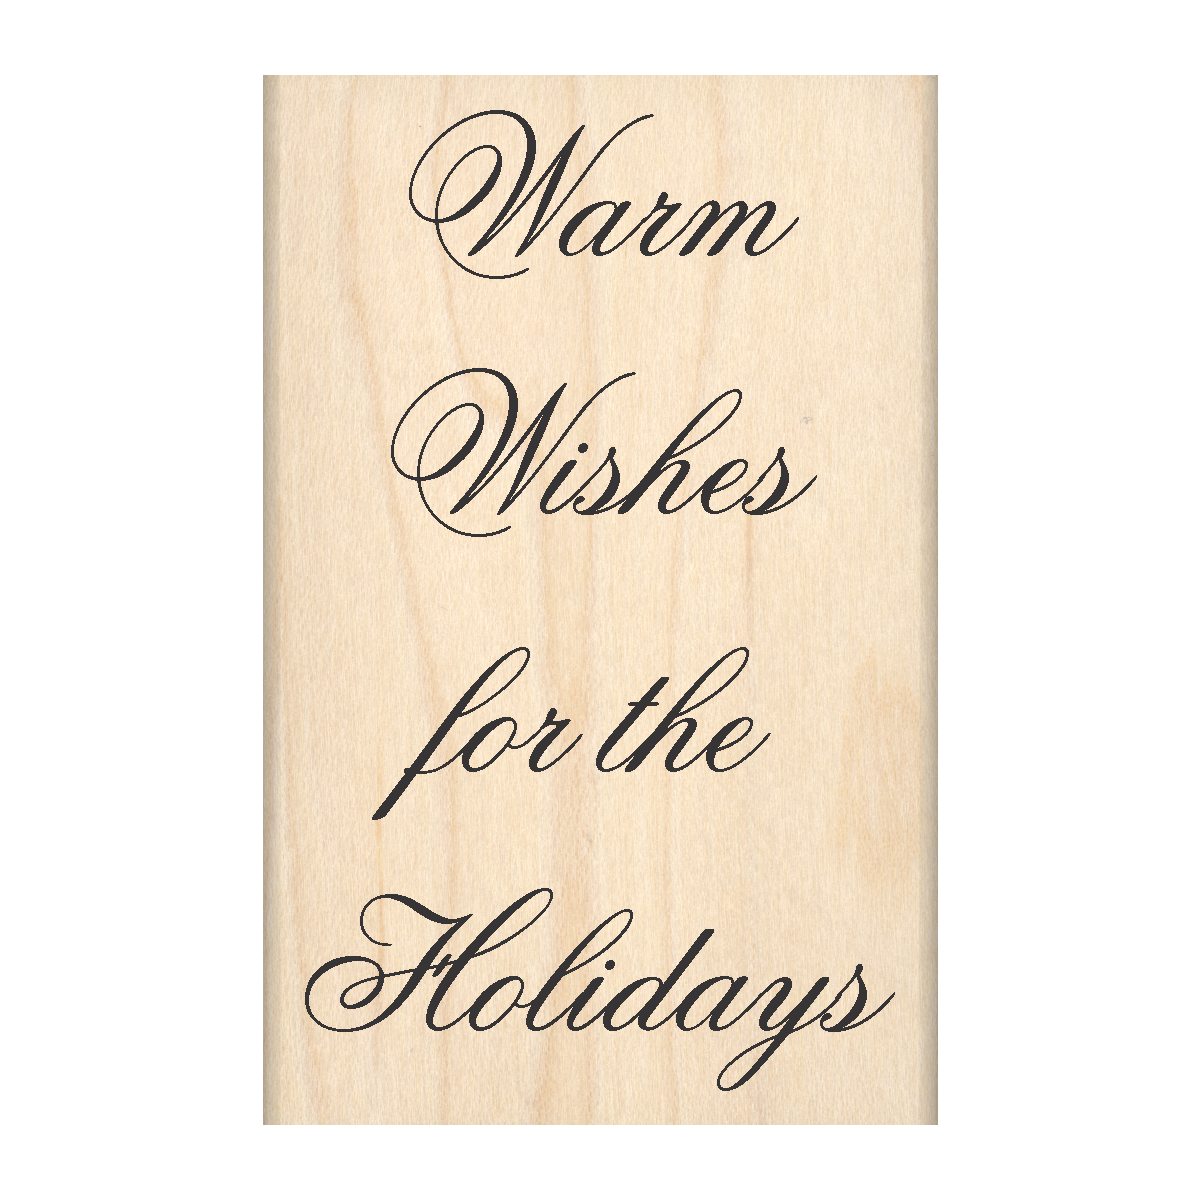 Warm Wishes for The Holidays Rubber Stamp 2.25" x 3.5" block